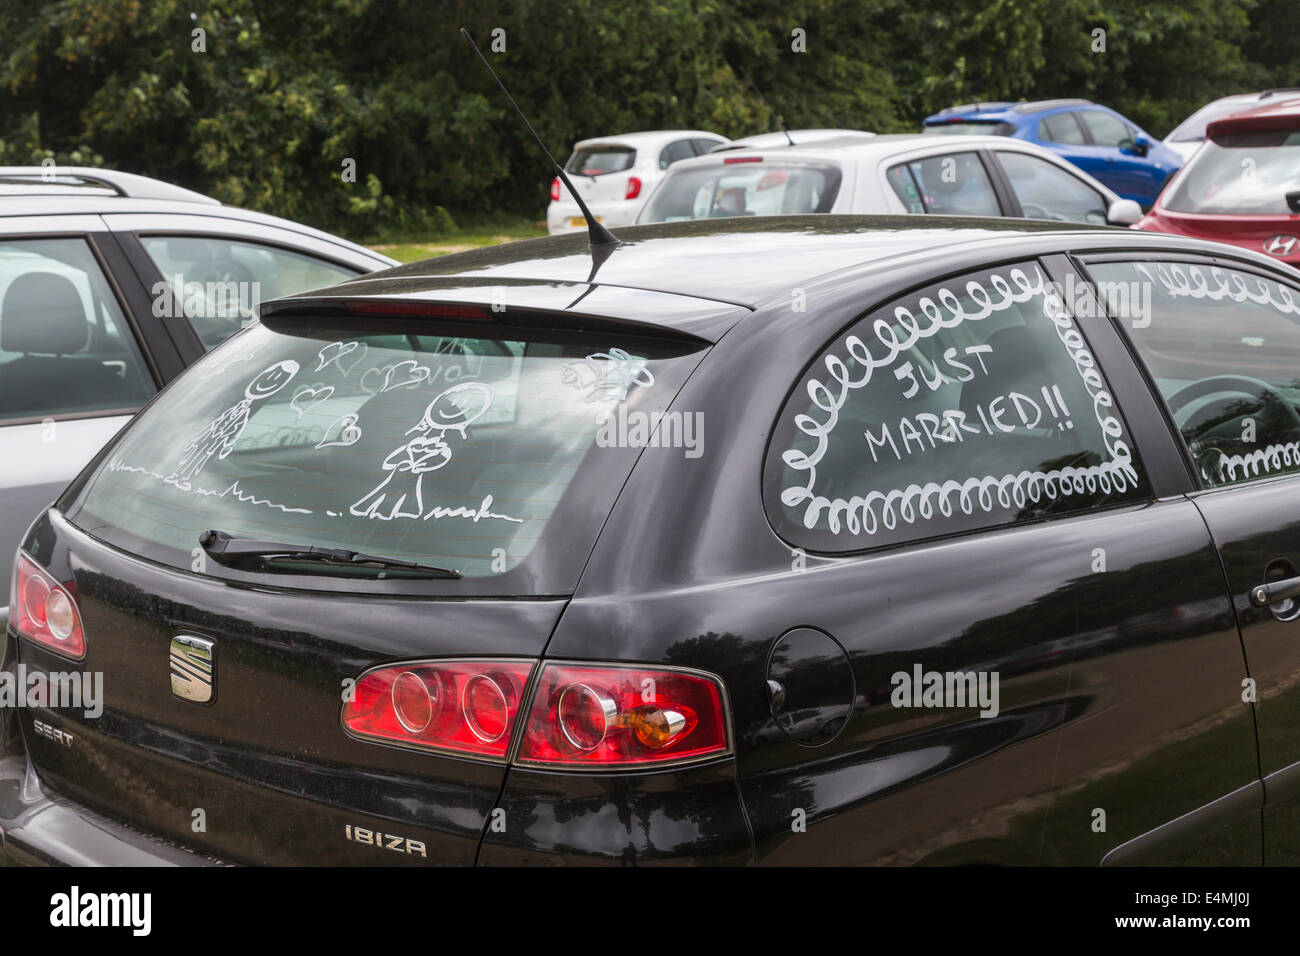 Honeymooners' black car painted with 'Just Married!!' on side window and figures of bride and groom on rear window Stock Photo